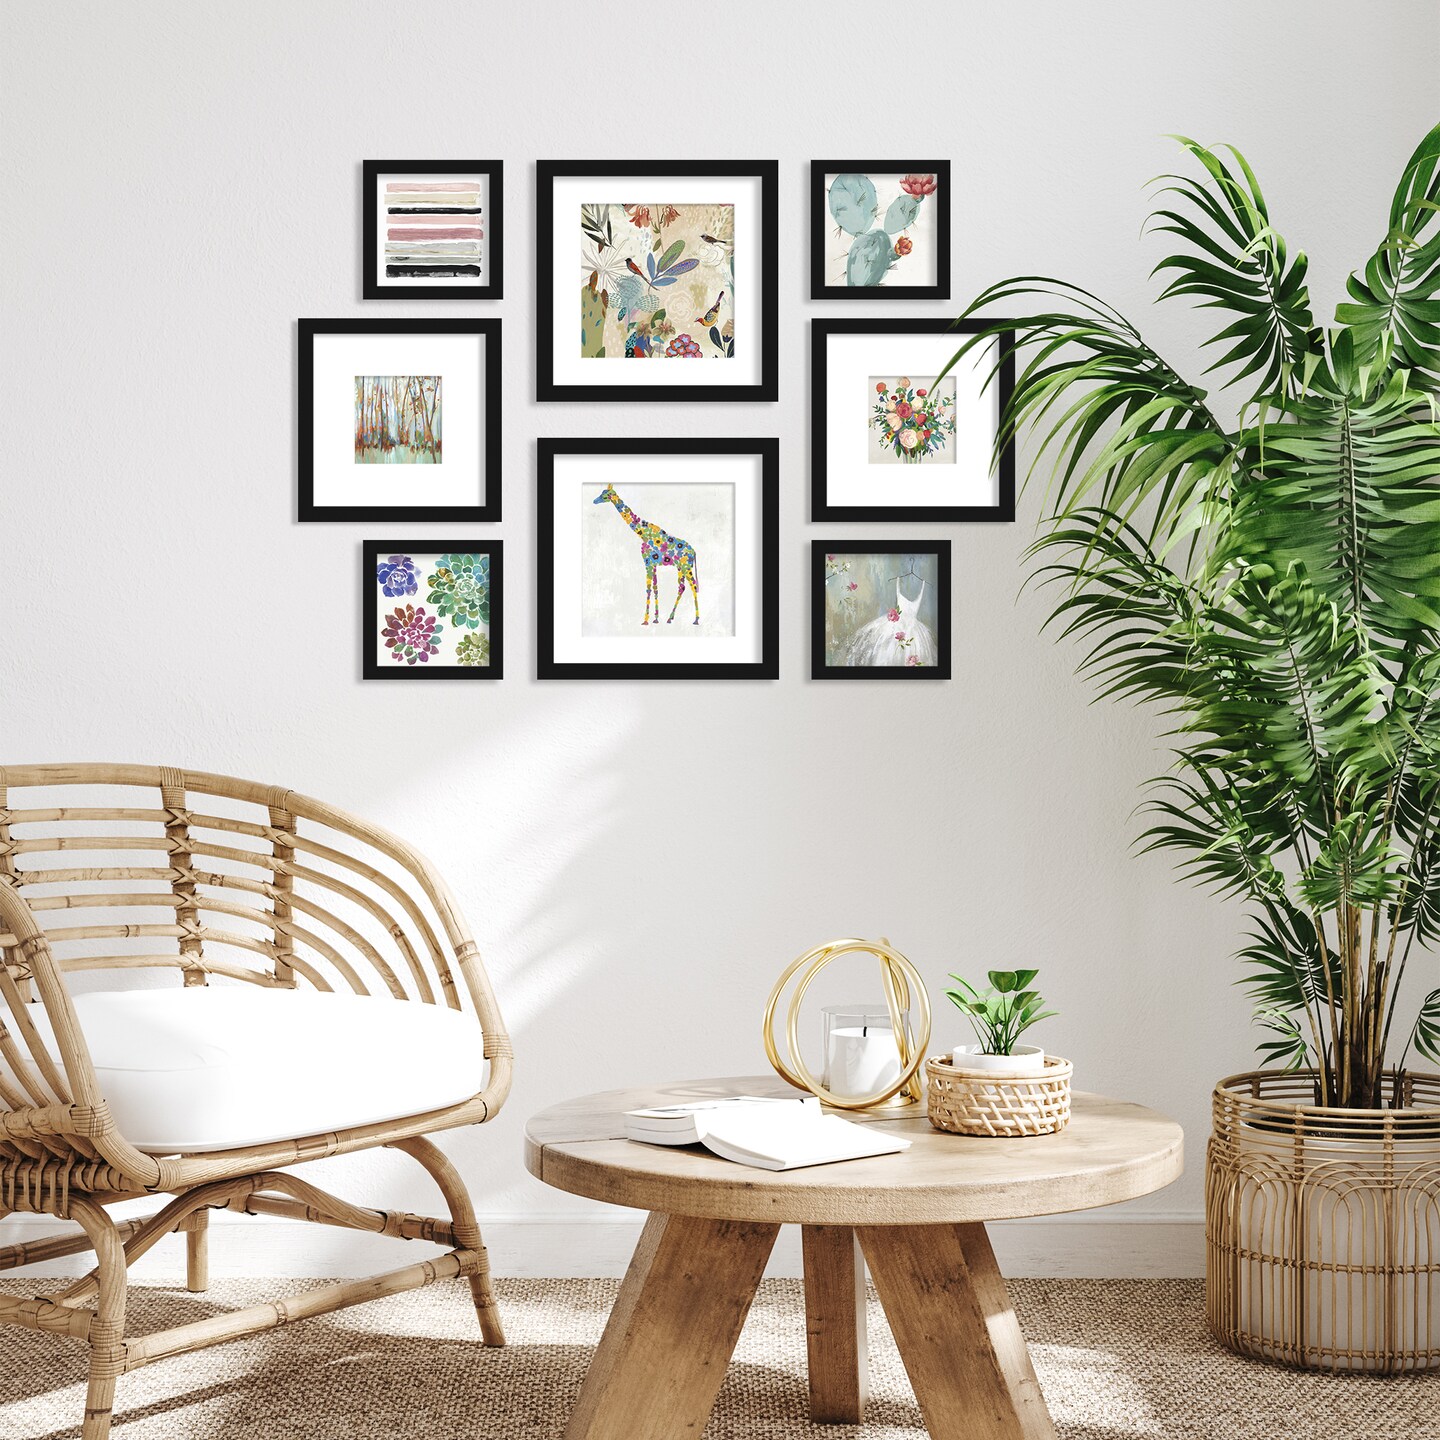 Americanflat Dreamy Floral Forest 8 Piece Framed Gallery Wall Art Set